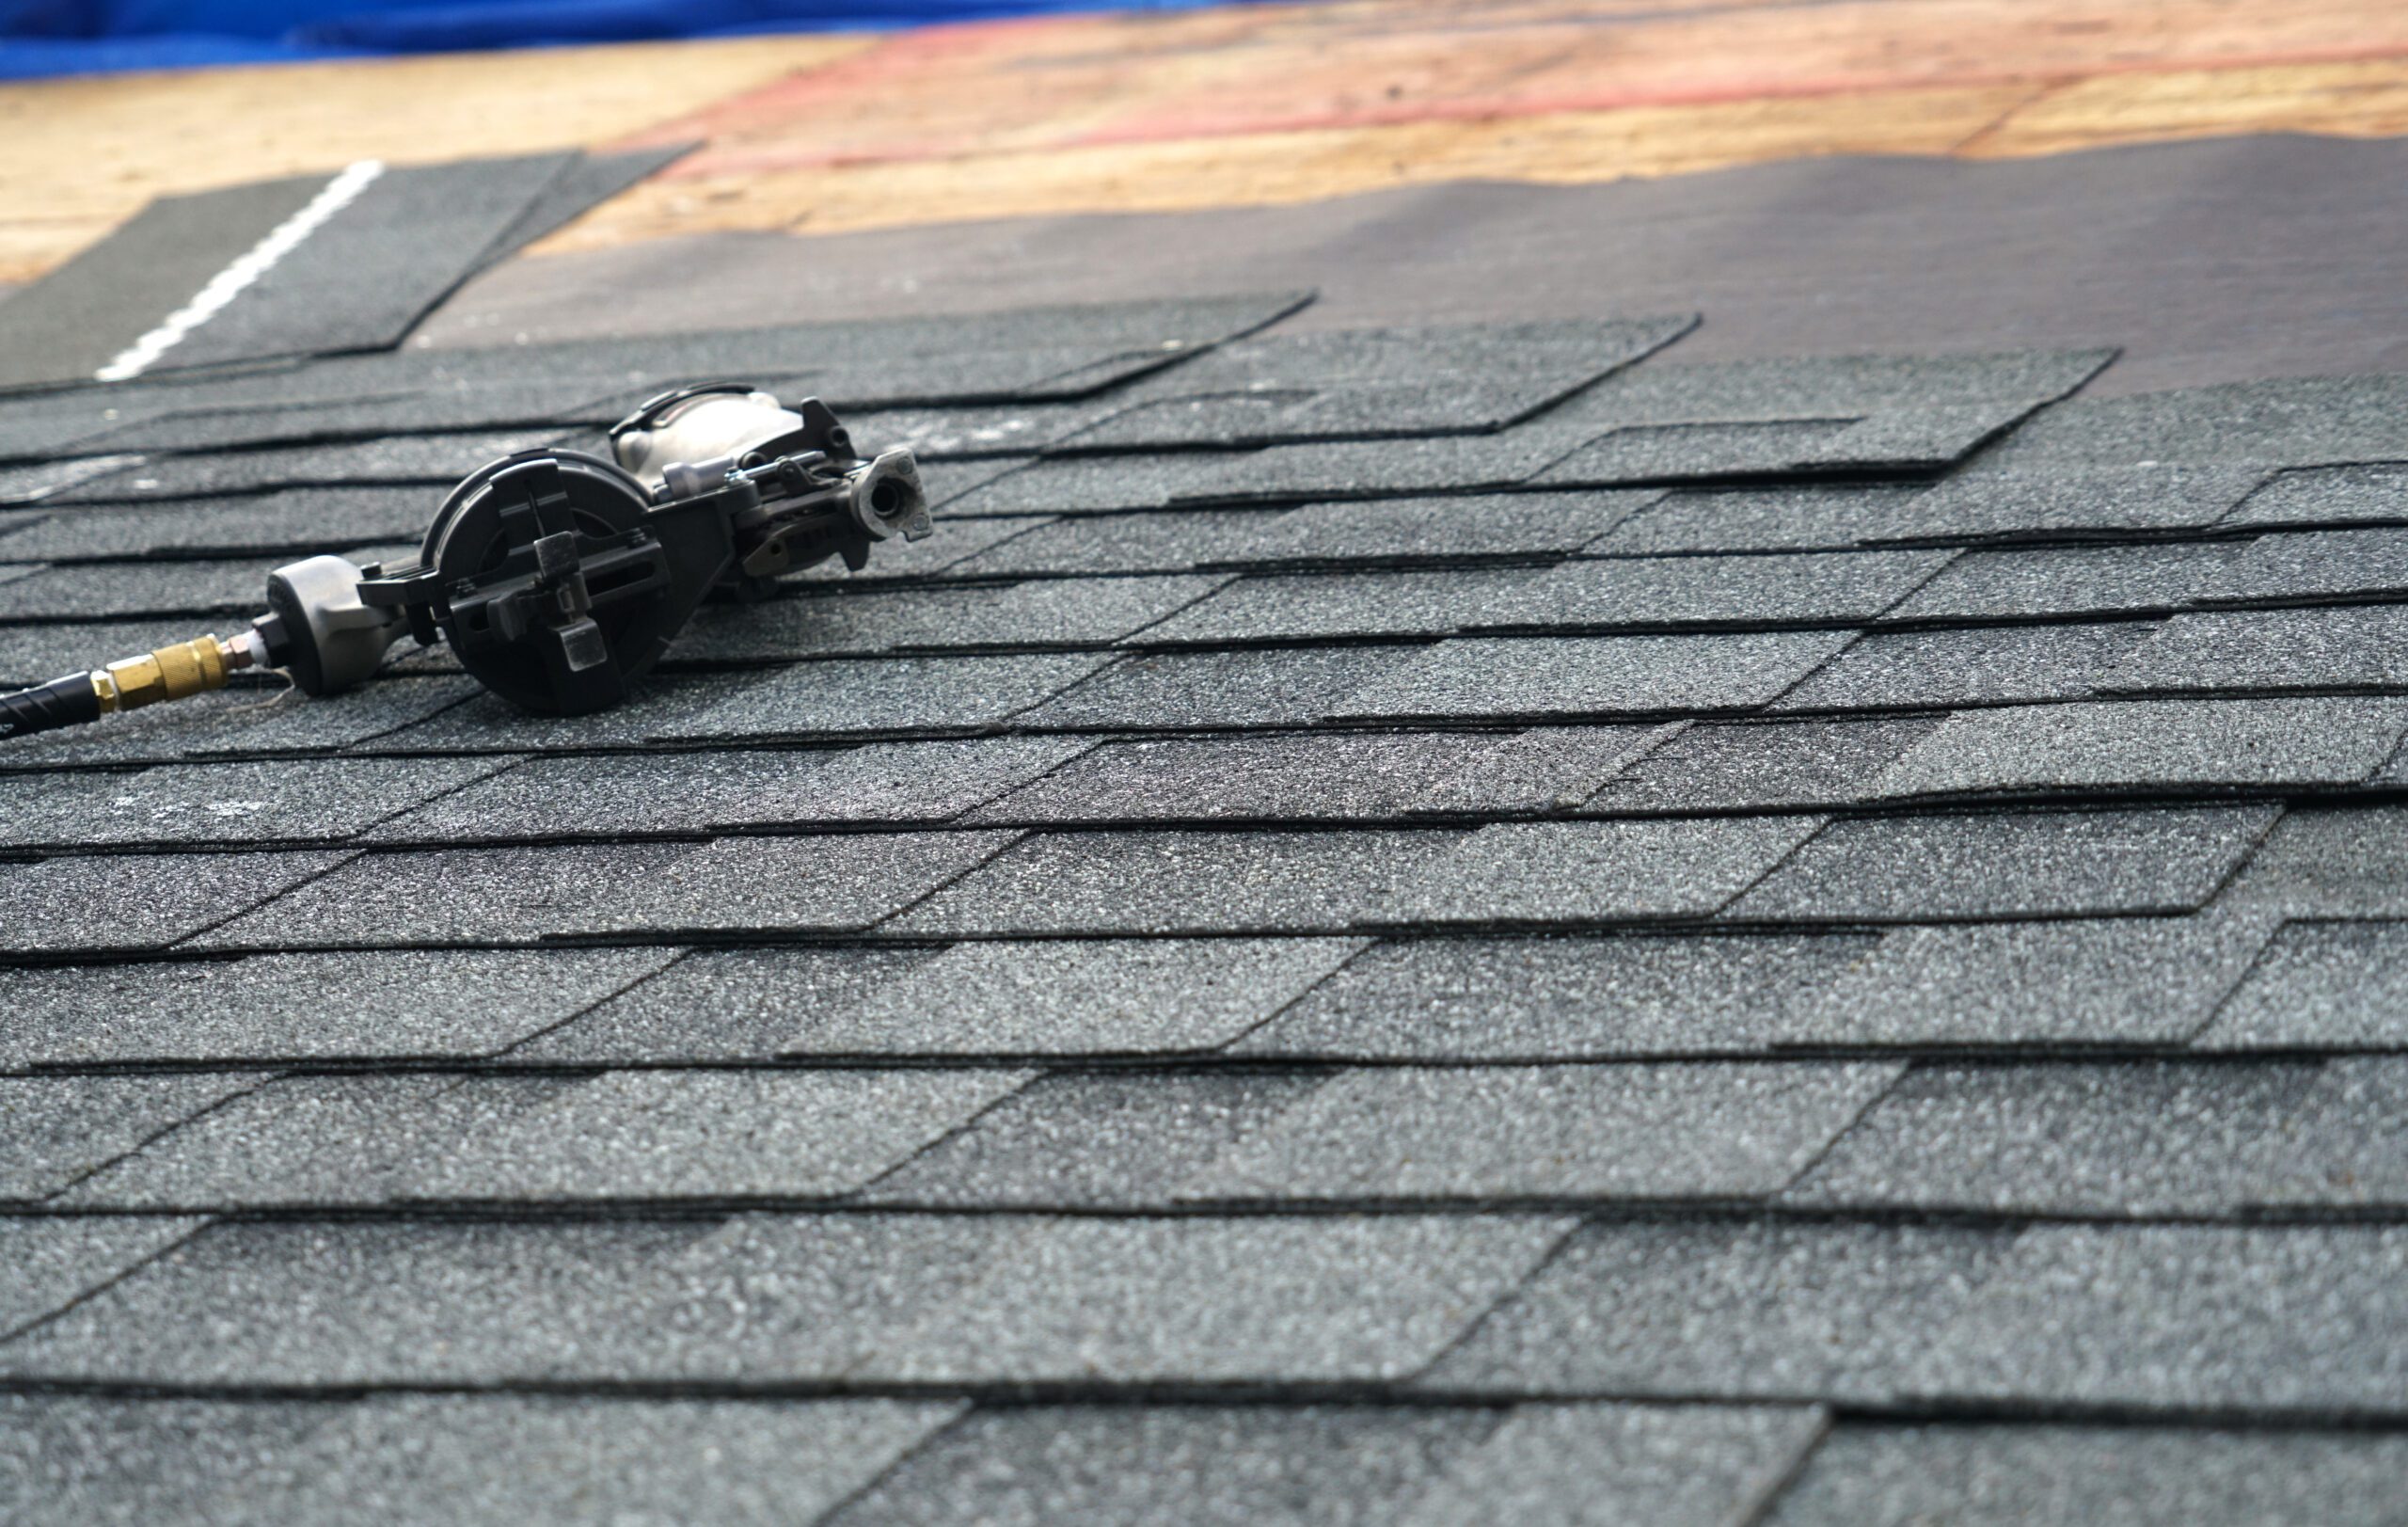 Images of shingles and a nail gun for roofing